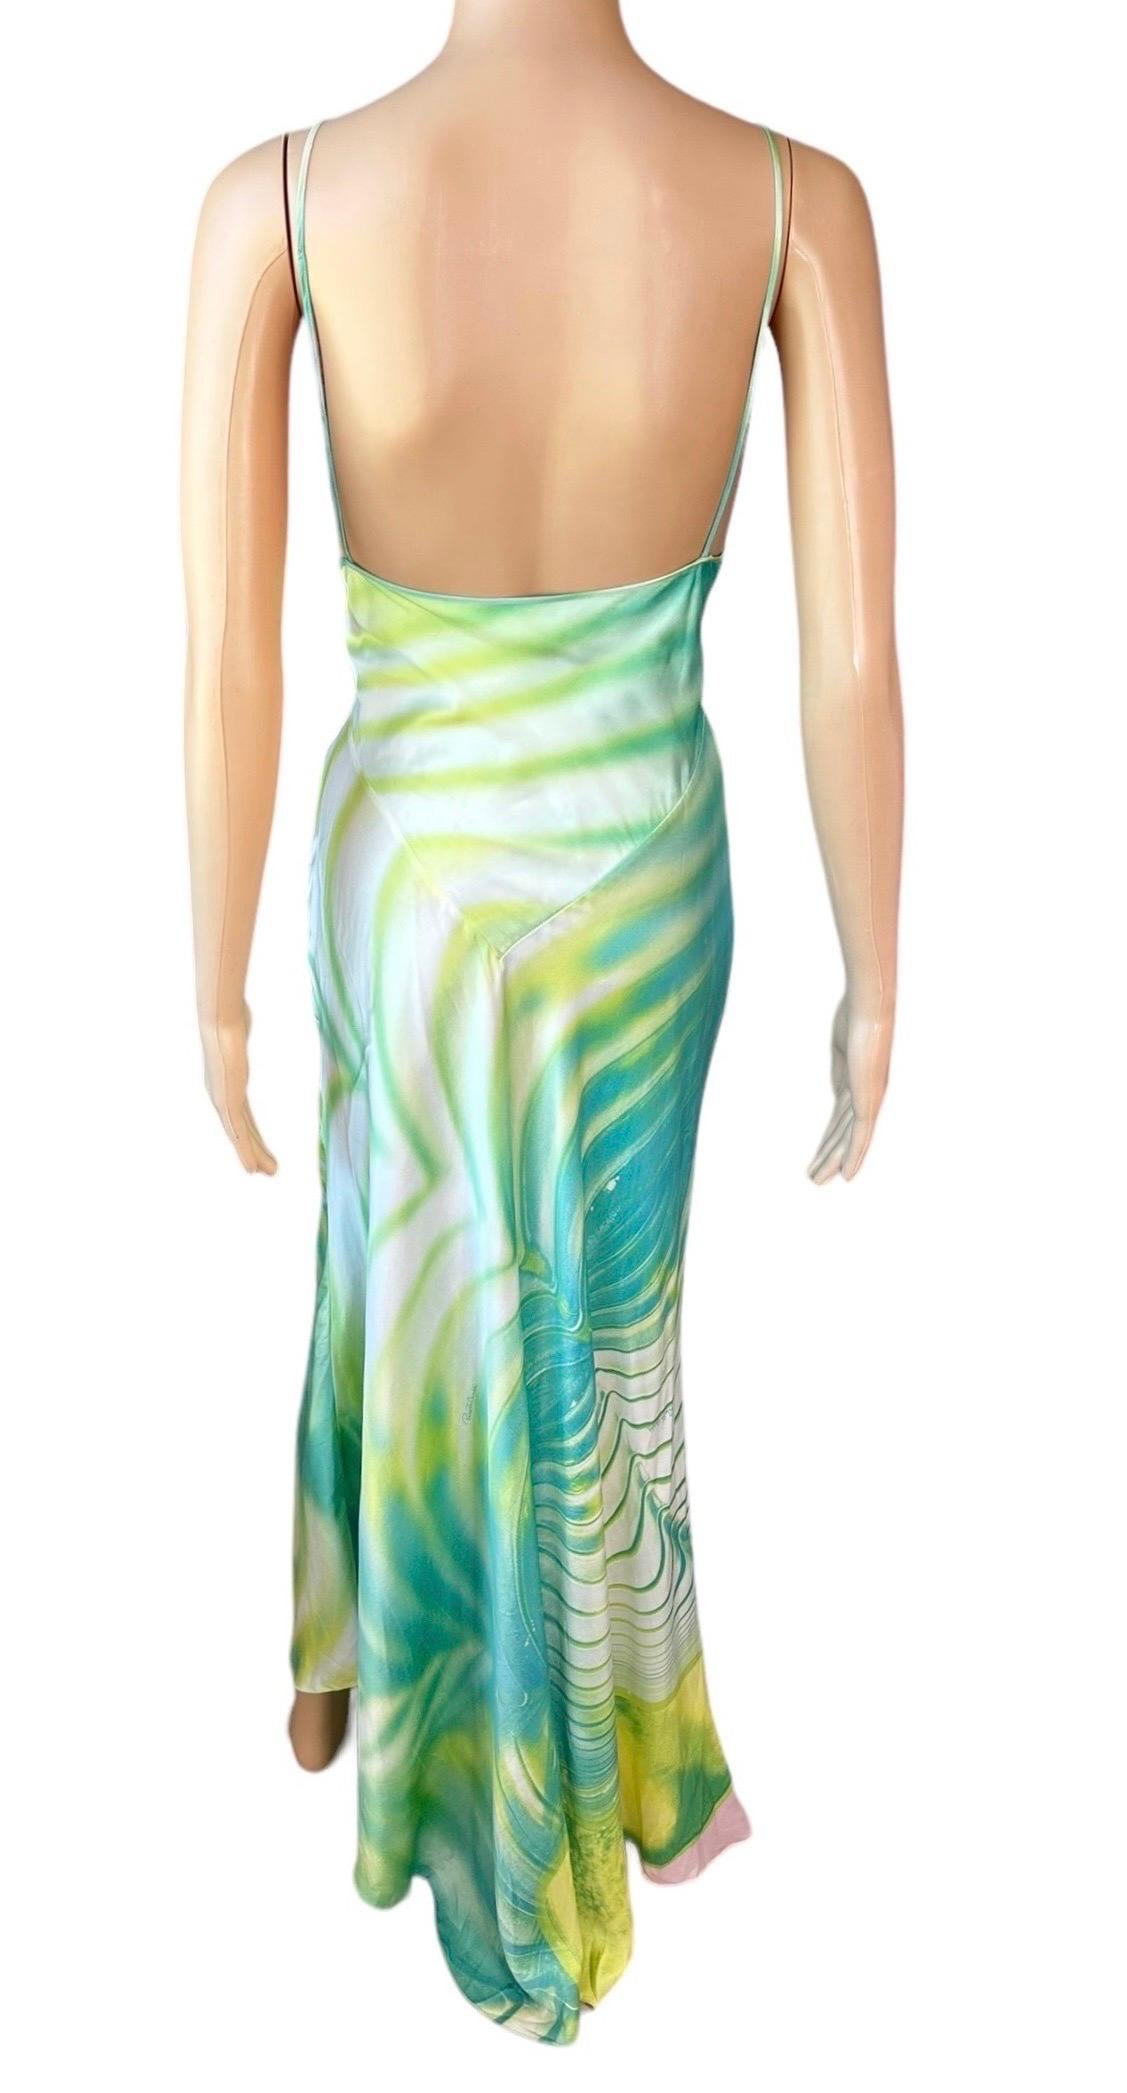 Roberto Cavalli S/S 2001 Psychedelic Print Silk Slip Maxi Evening Dress Gown For Sale 2